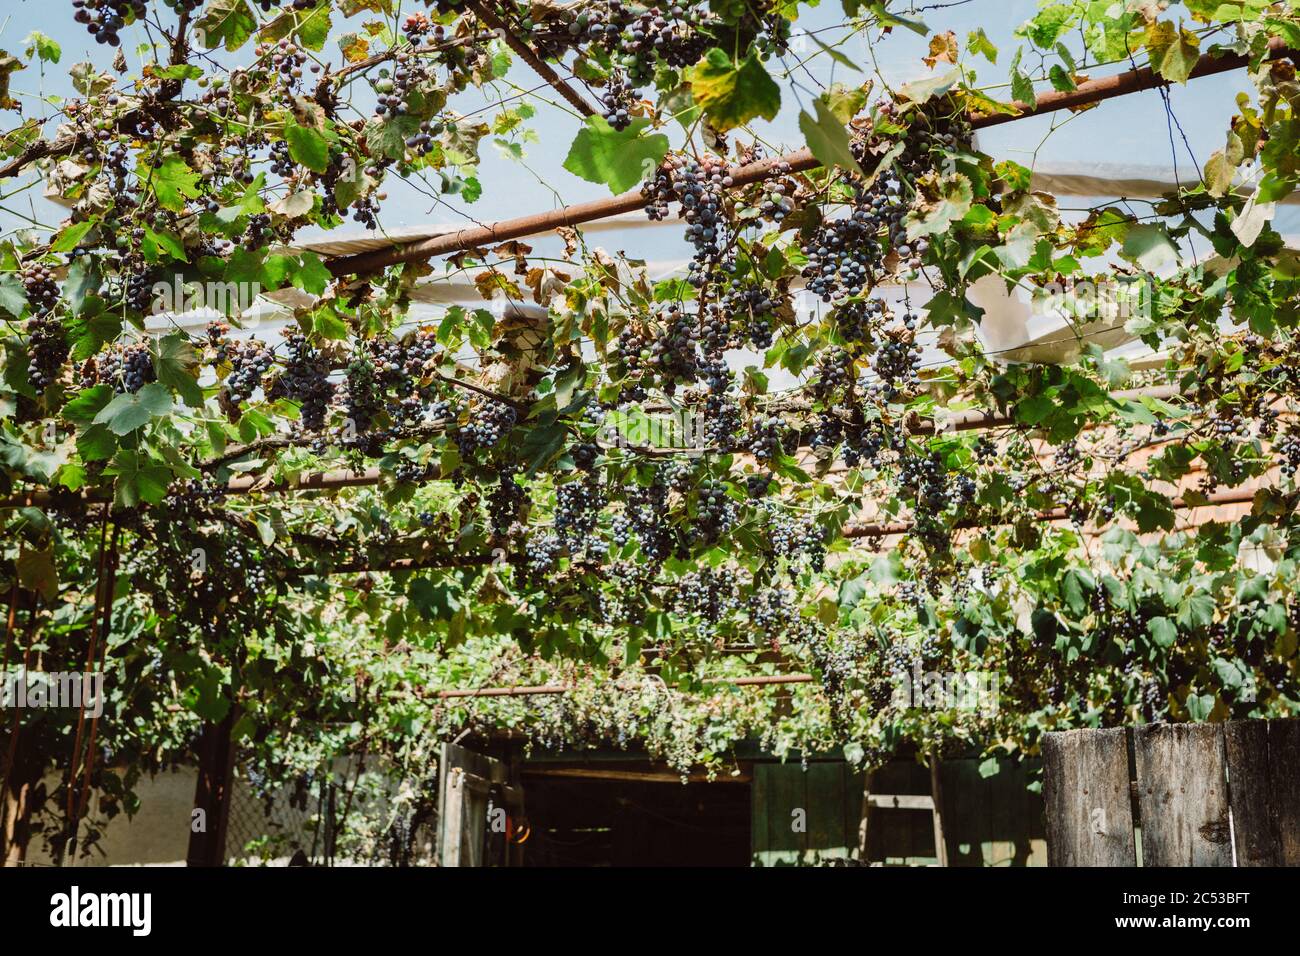 Grapevine with blue grapes used as a sun protection for shading the backyard during the hot sunny summer day in Romania Stock Photo